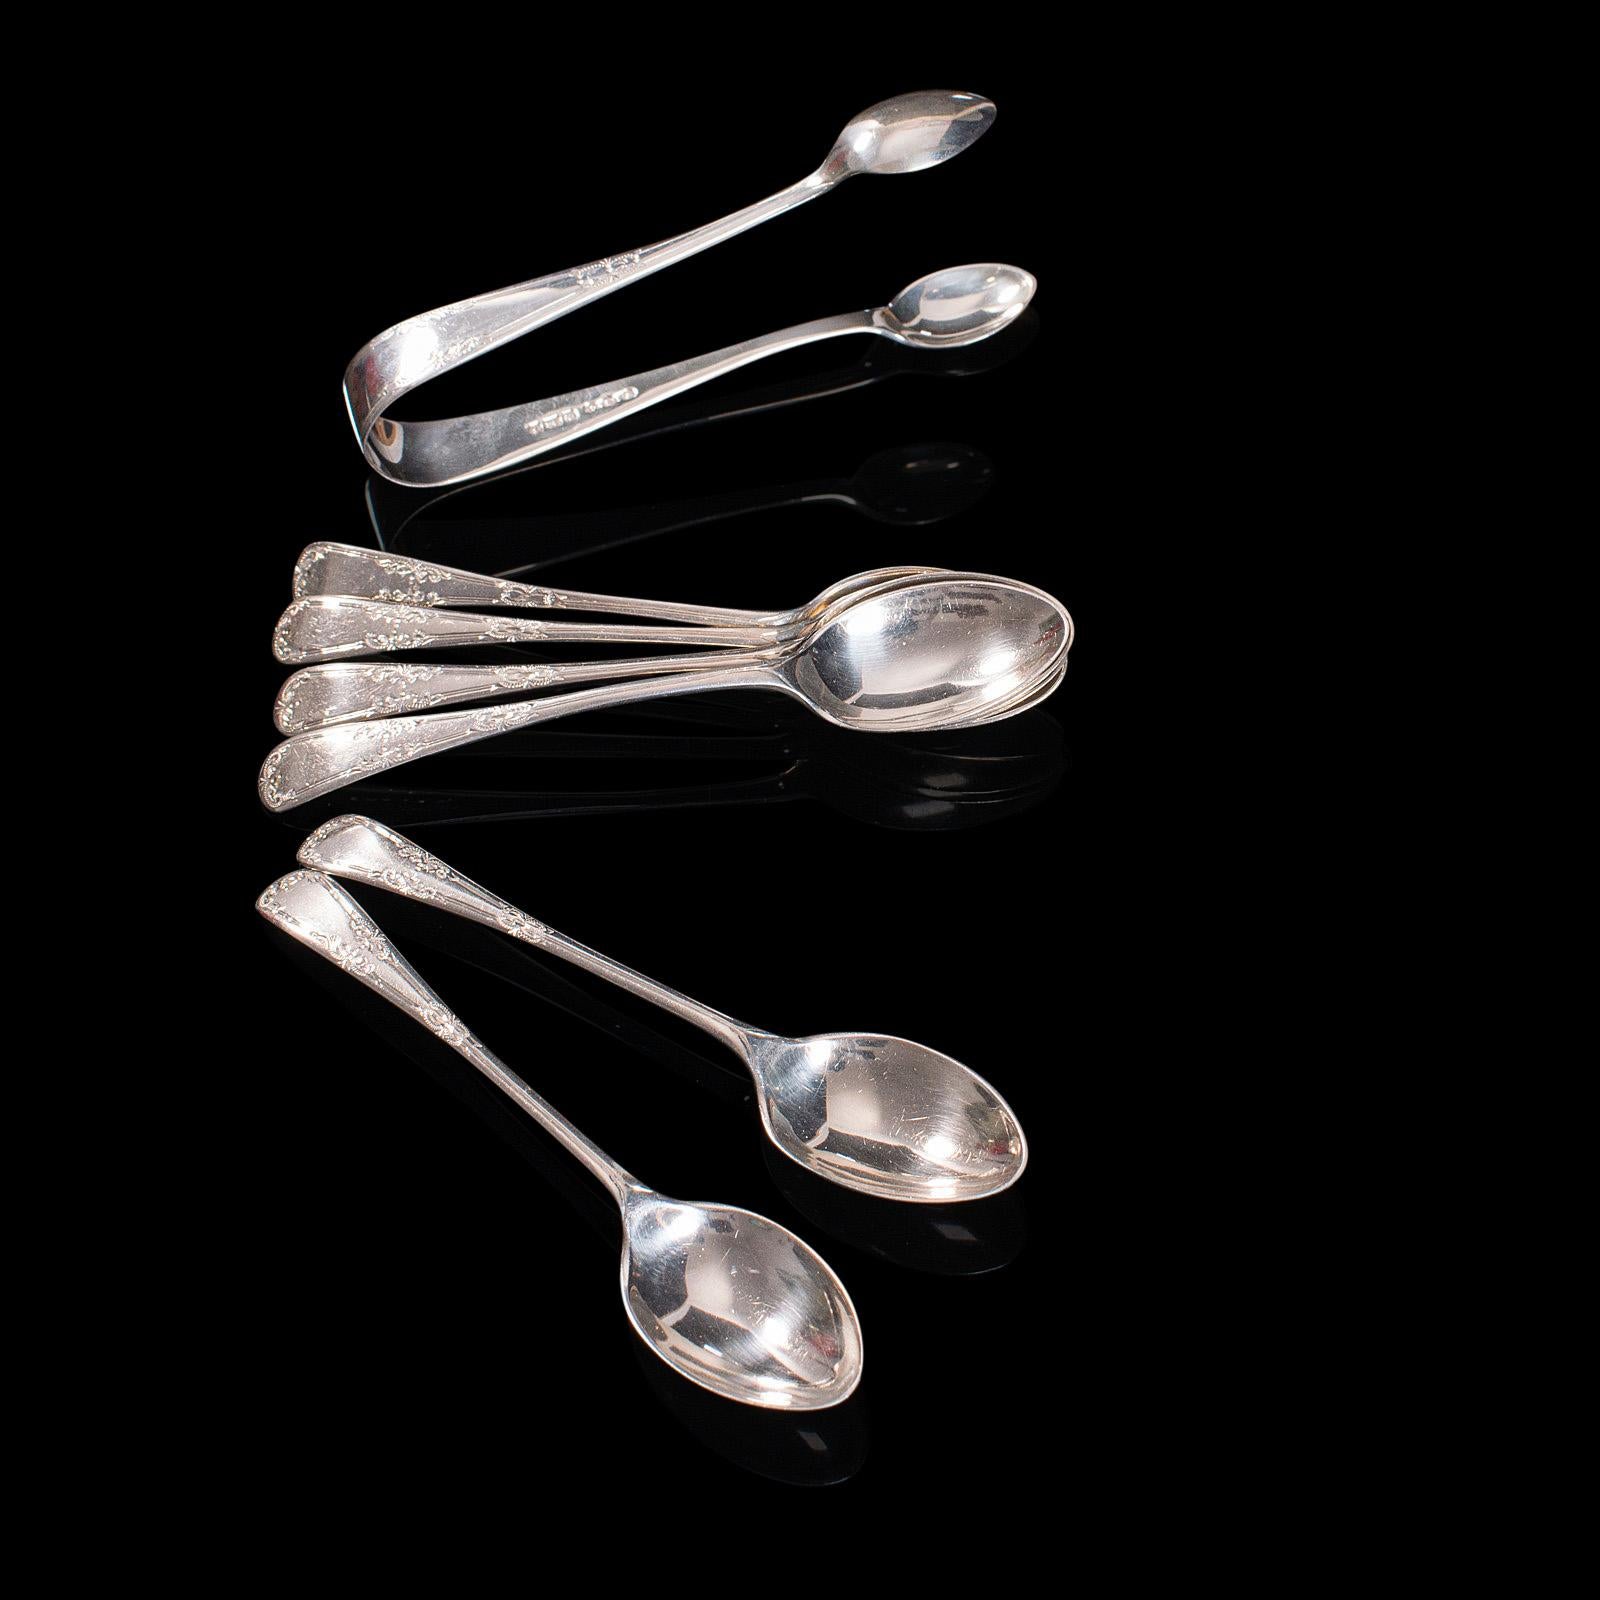 Details about   LOT OF 11 ANTIQUE 1917 ADAM PATTERN SILVERPLATED TEASPOONS/ TEA SPOONS 